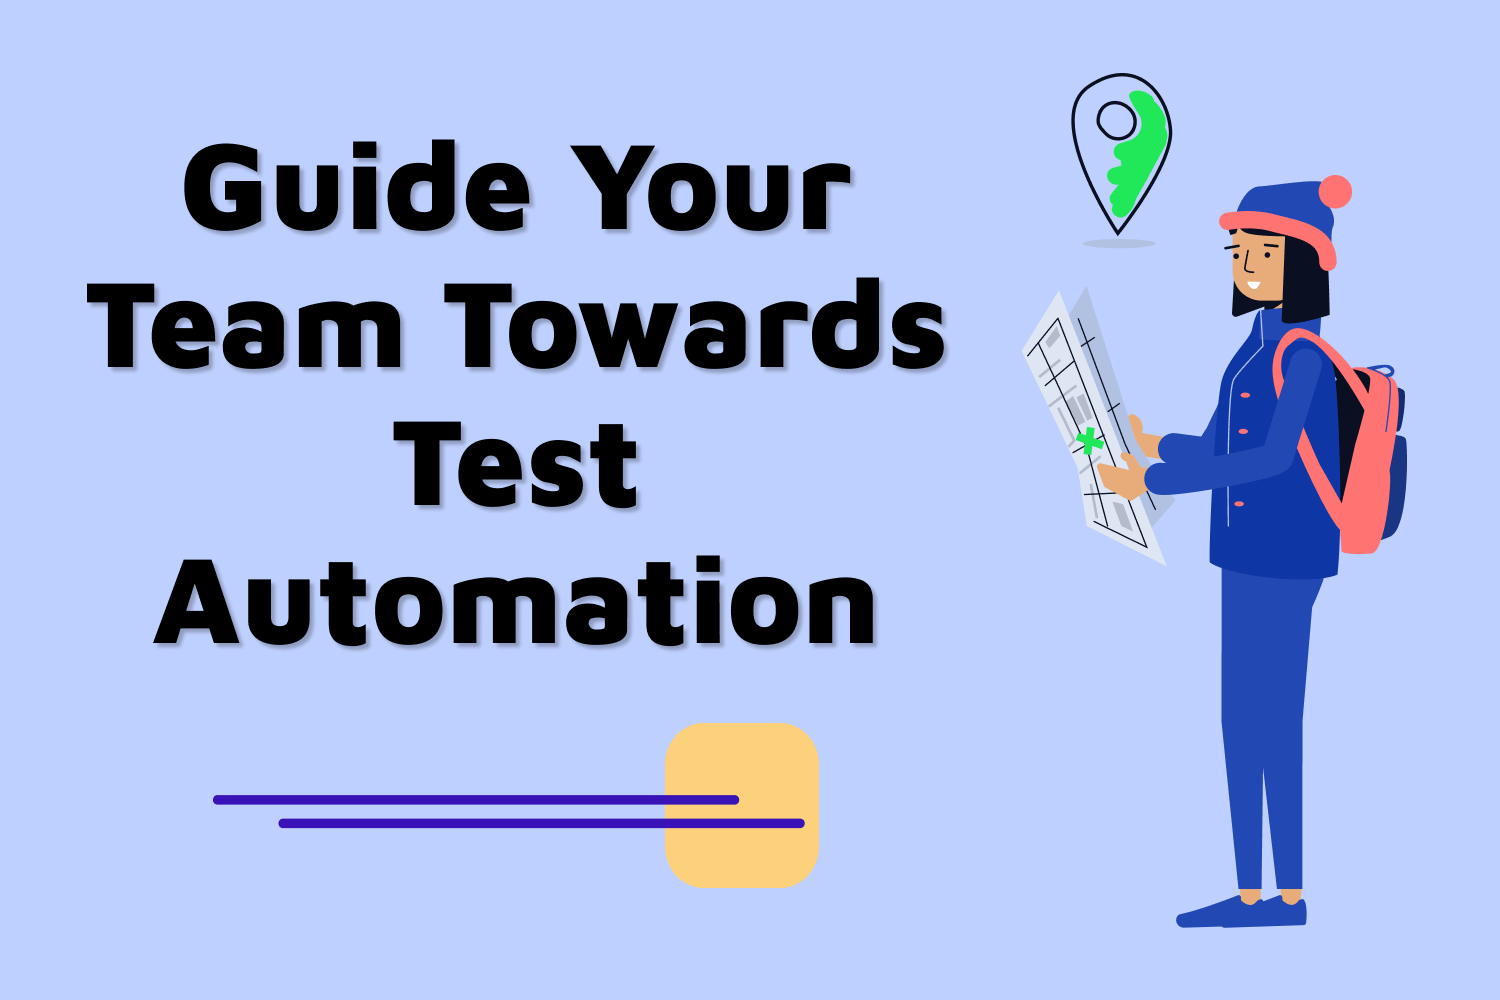 Guide Your Team Towards Test Automation